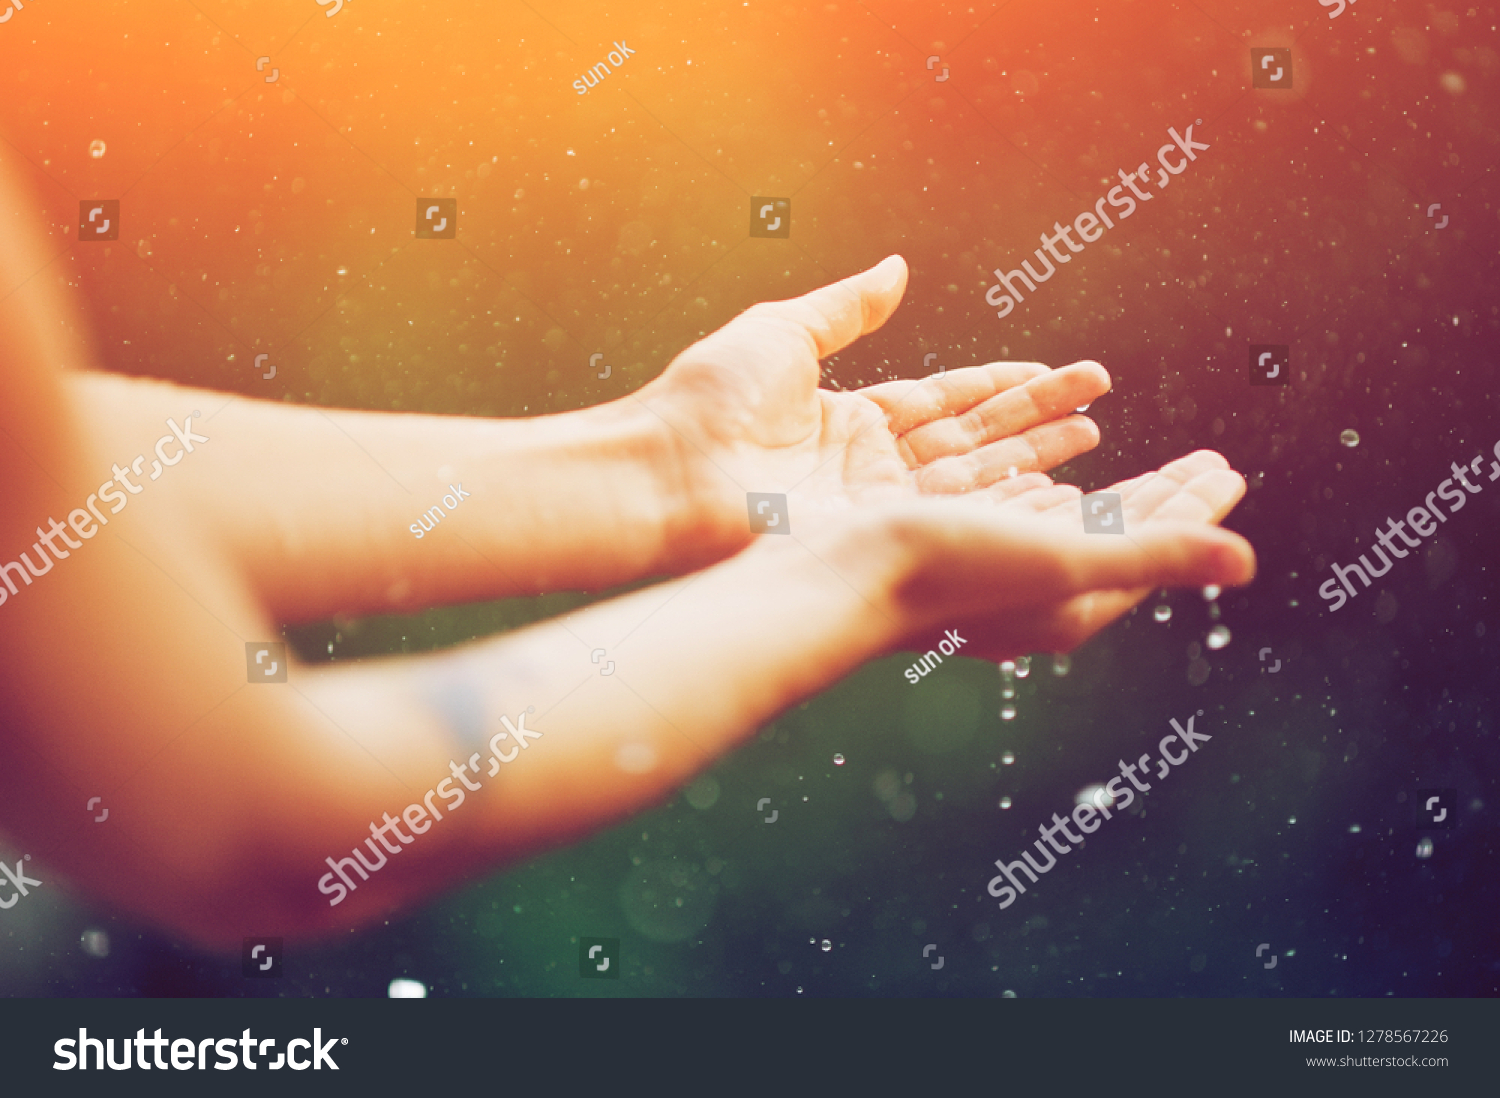 hand catching rain drops on blurred background. Woman hands praying for blessing from god on sunset. Empowerment, sacred forgiveness, positive arm energy, good morning, reborn change calm zen concept. #1278567226